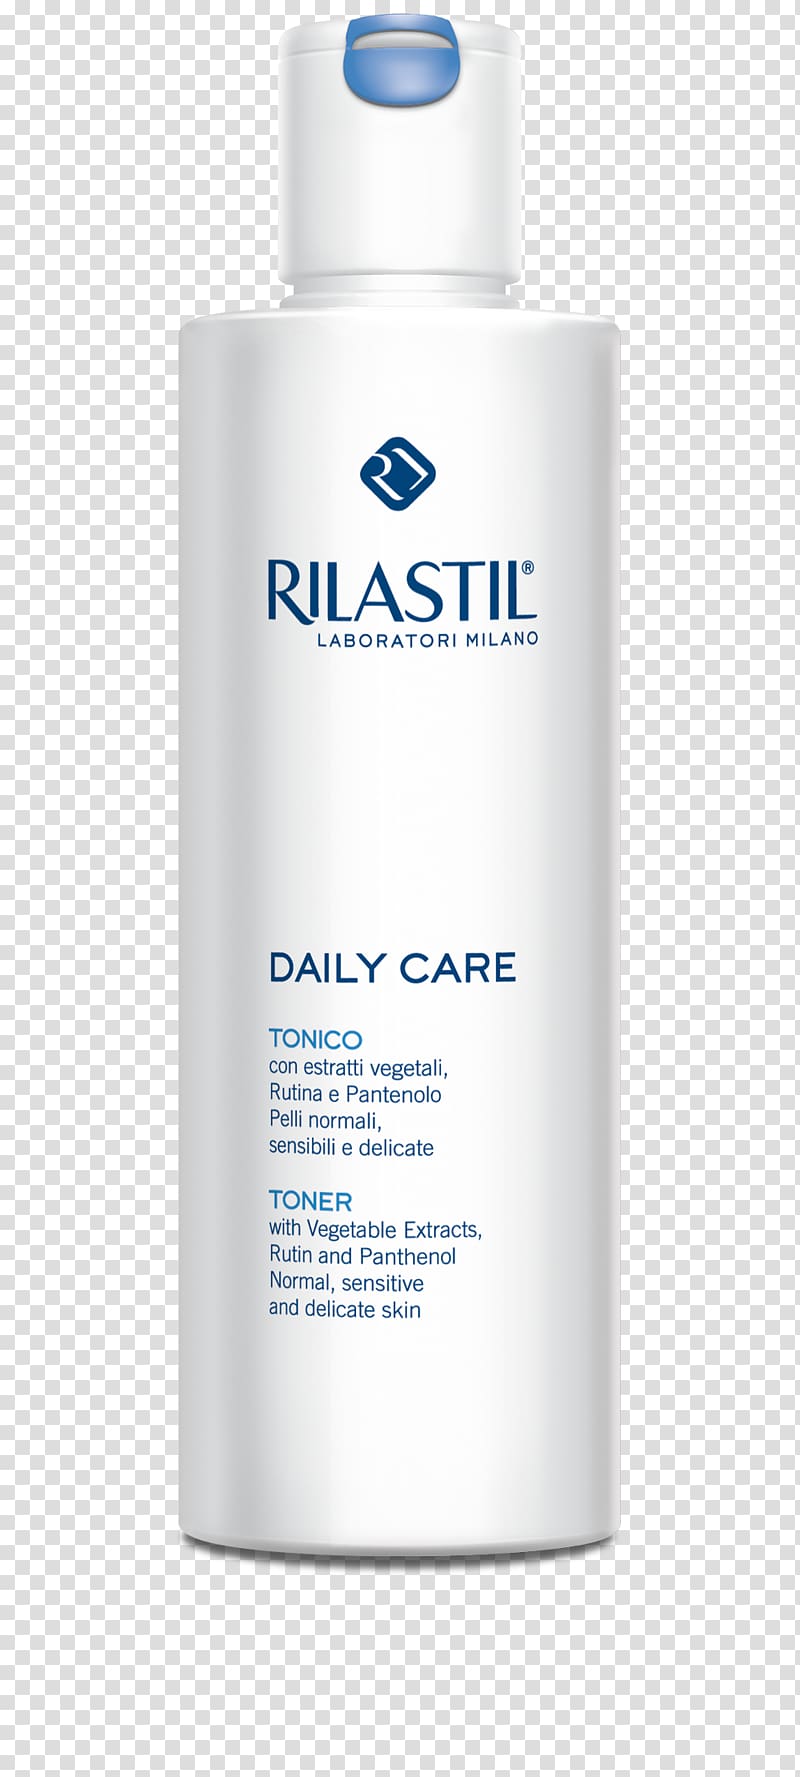 Lotion Rilastil Daily Care Facial Toner (with Vegetable Extracts Rutin and Panthenol) 250 ml Reinigungswasser Milliliter, horsetail herb powder transparent background PNG clipart